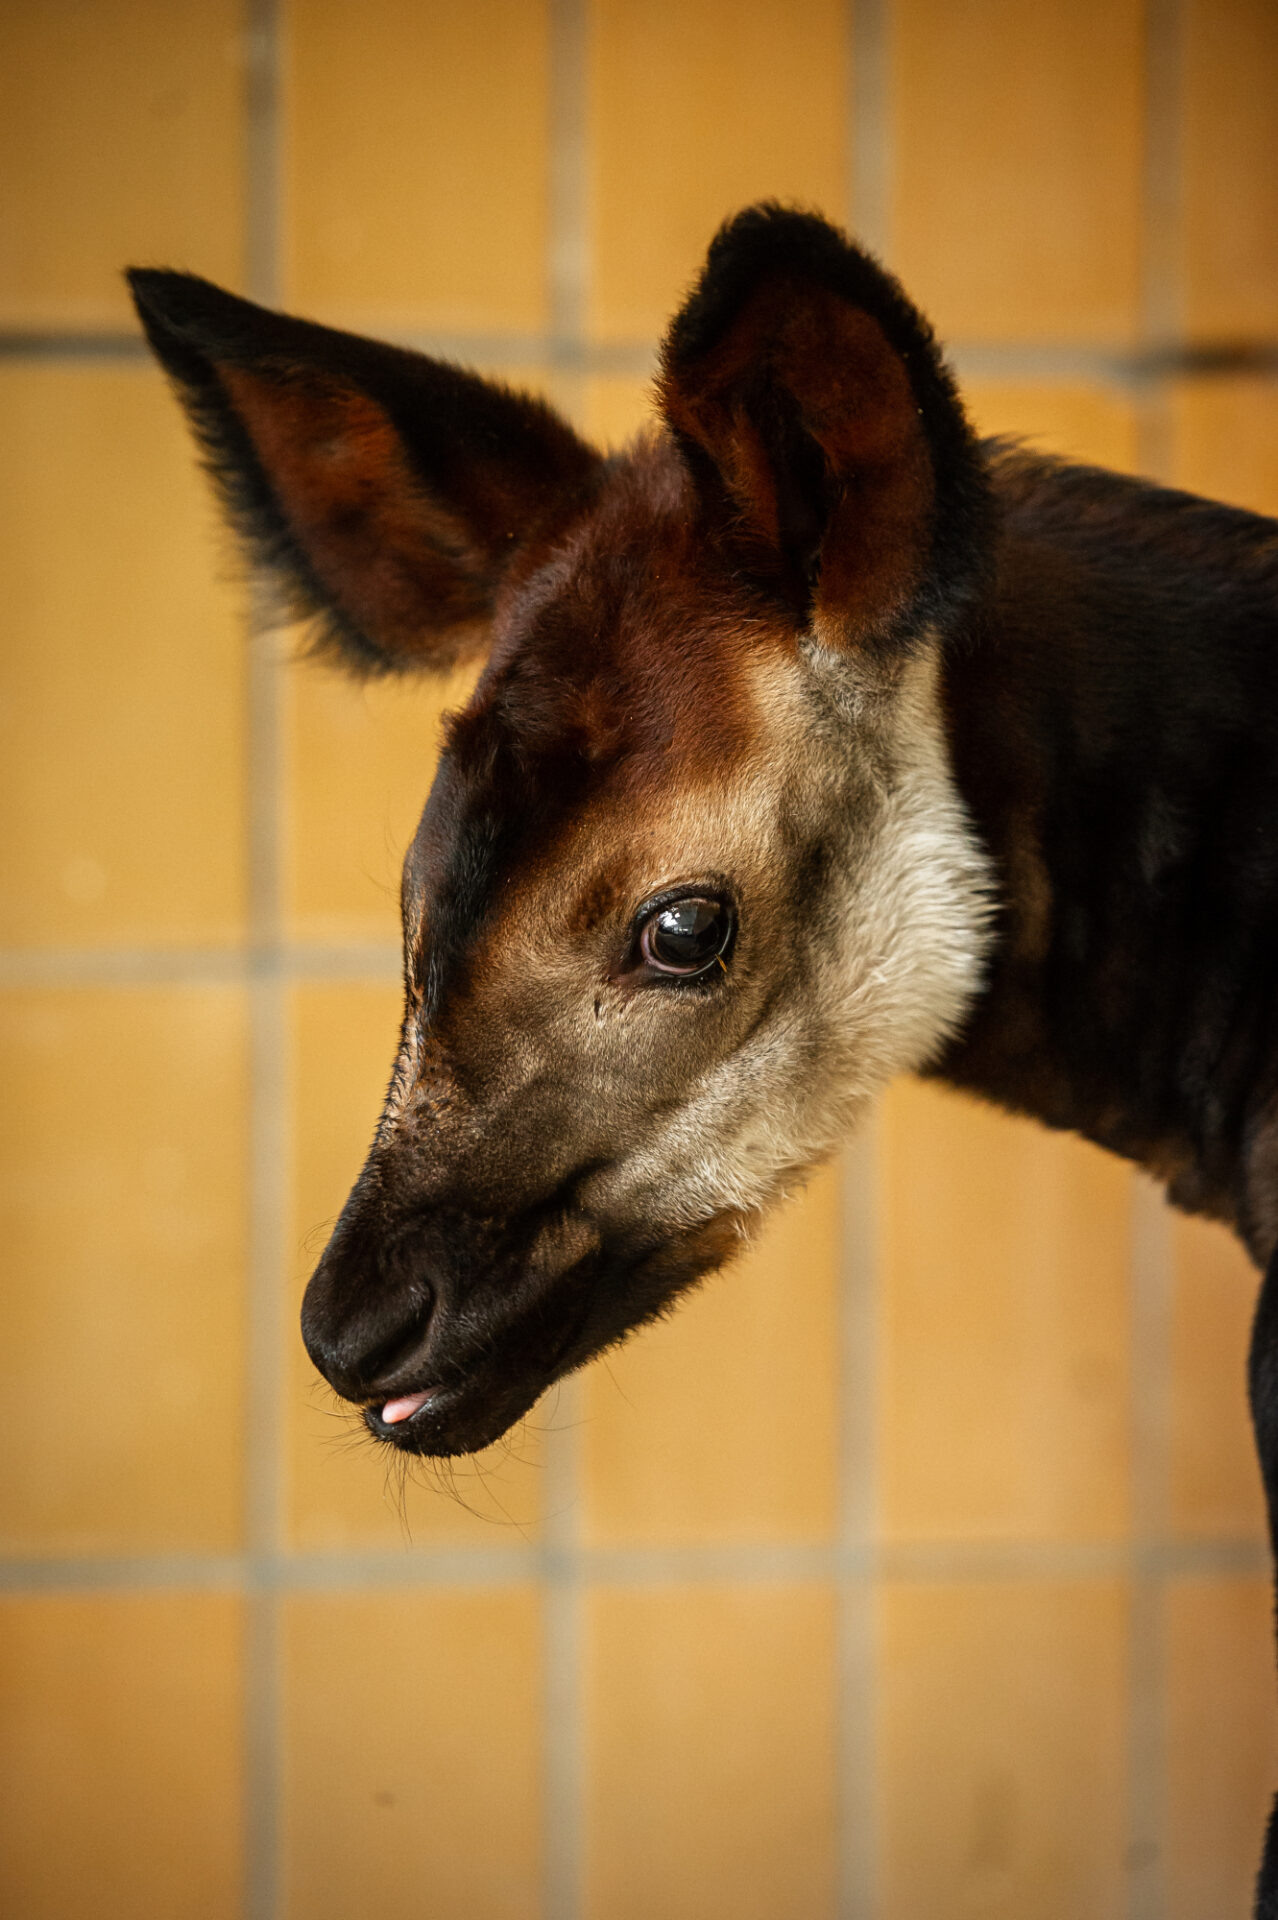 Baby okapi born at ZOO Antwerp is 'great news' for endangered species